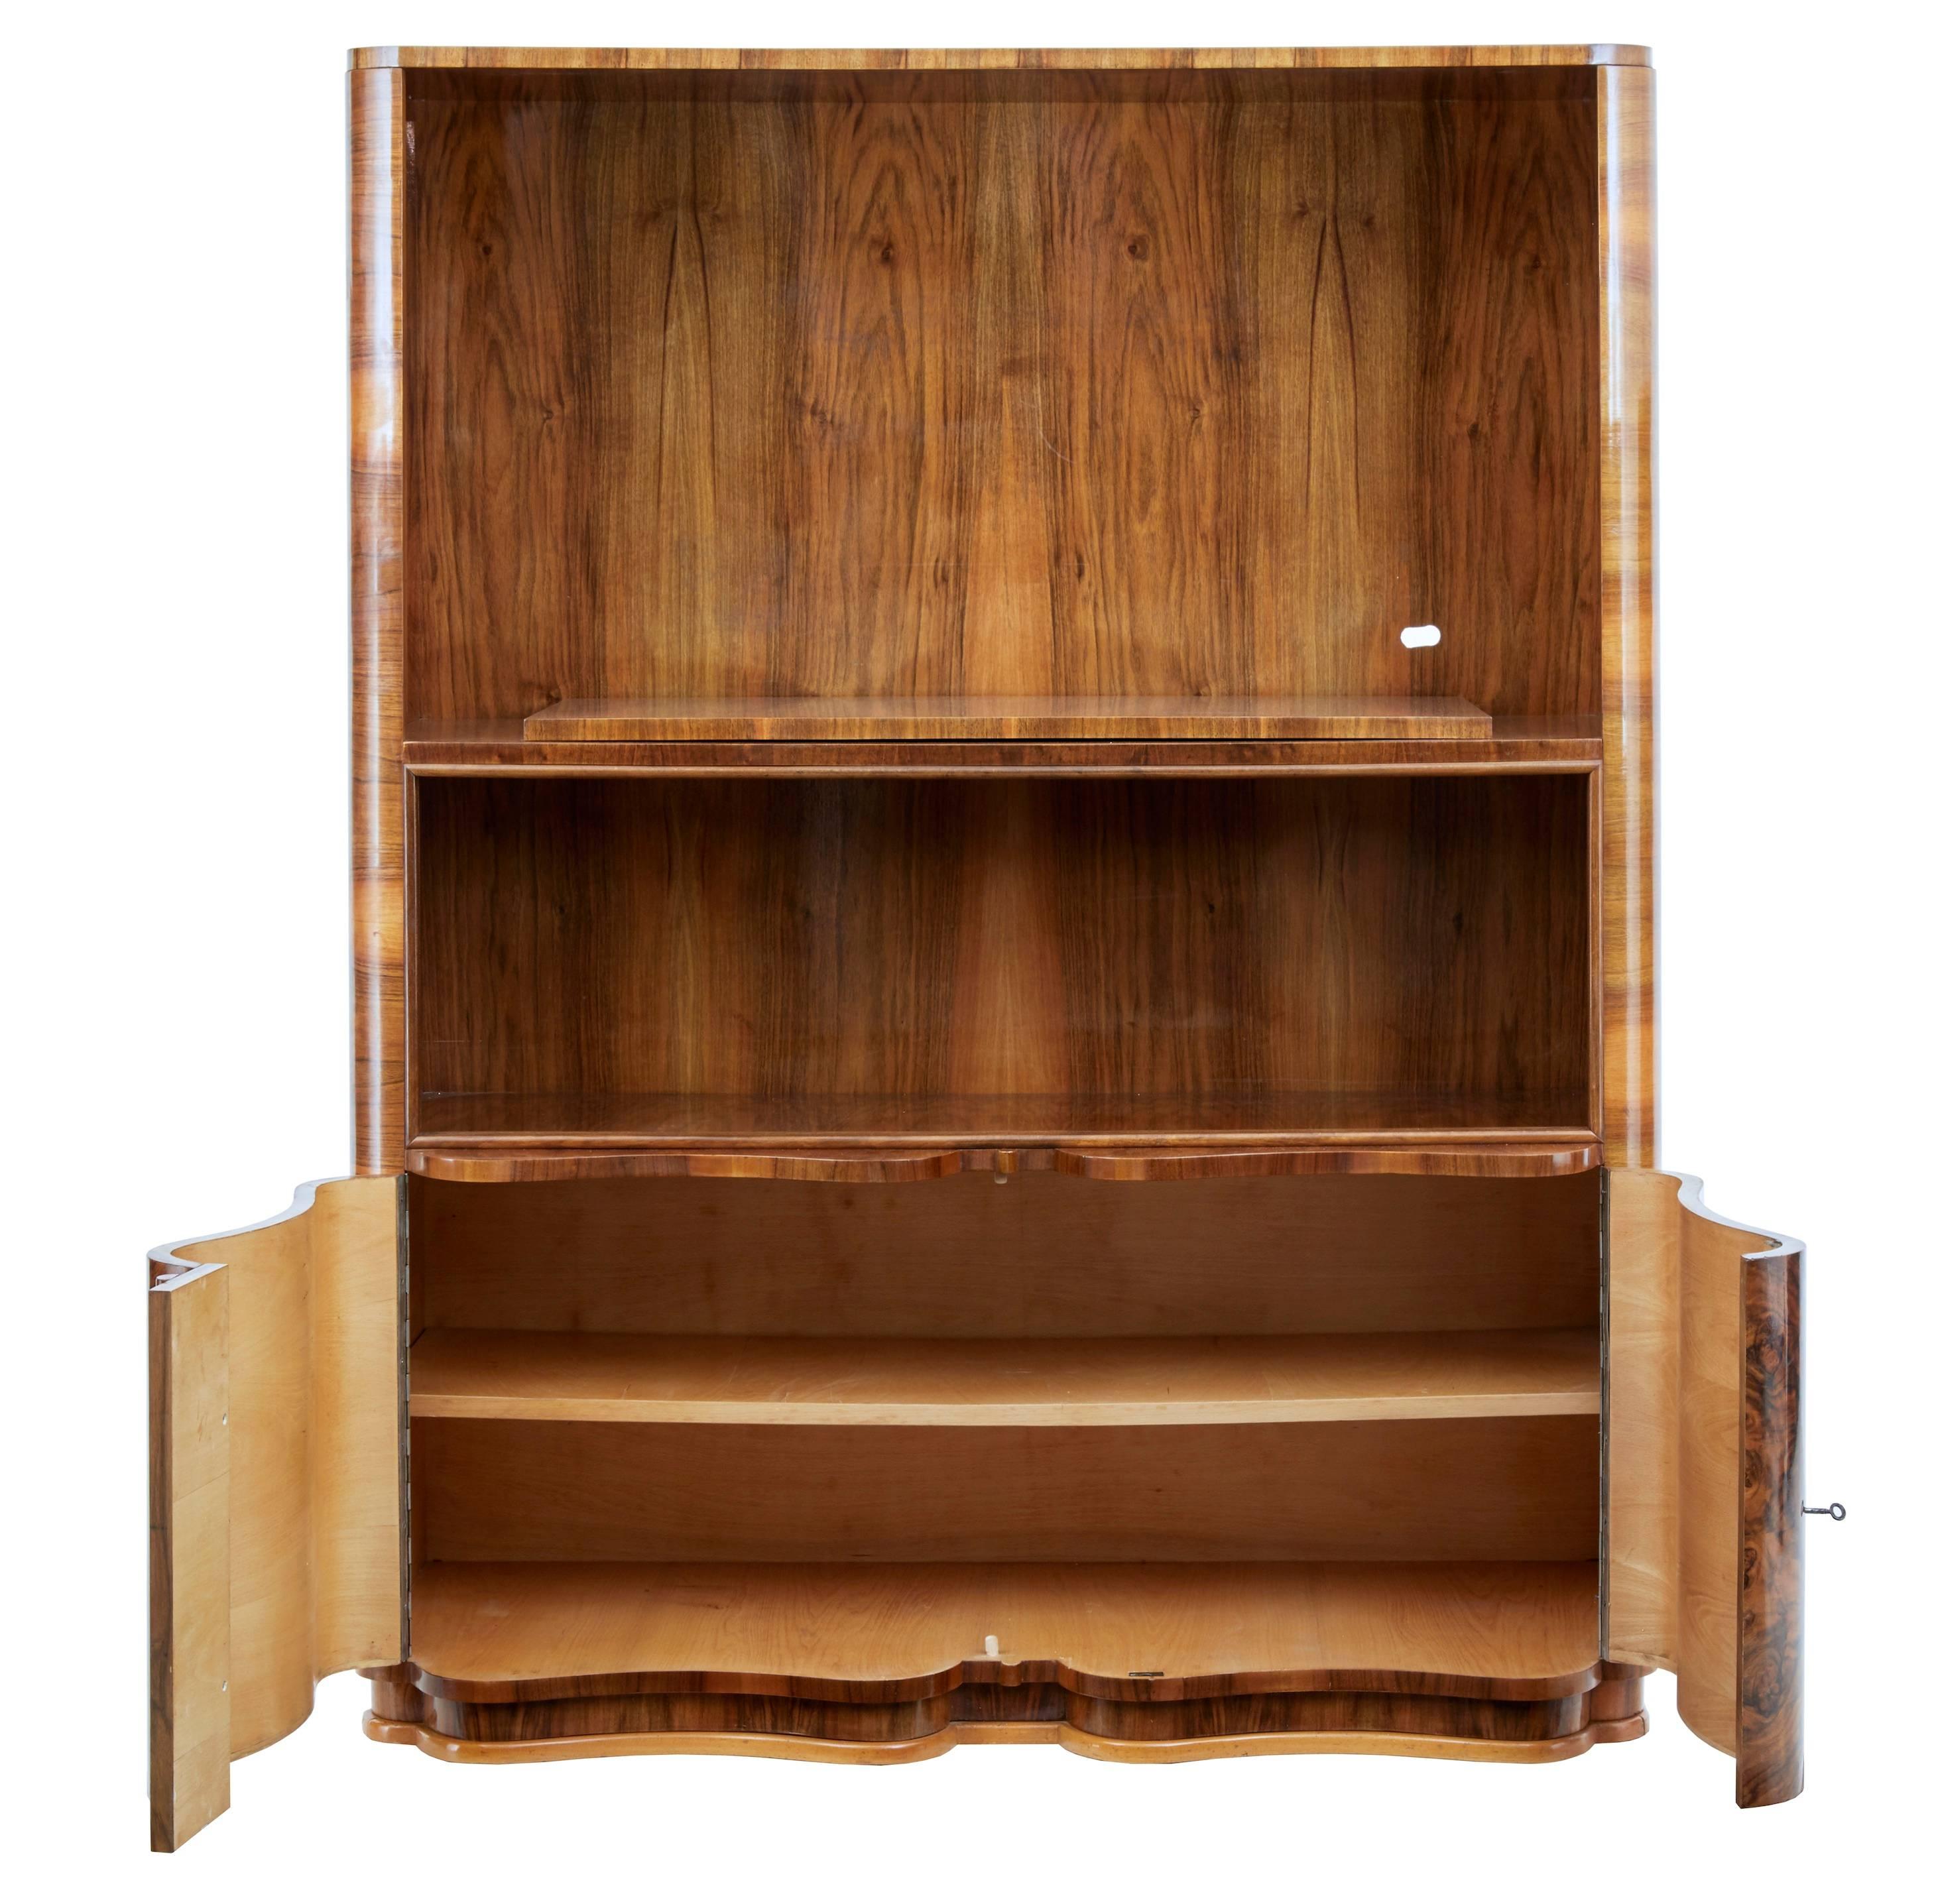 Late 1960s burr walnut veneered cabinet.
Strong color and striking grain.
Top section with platform with slight rotation ideal for a tv, below this an open space which would have had sliding doors which are no longer present.
Wave shaped double